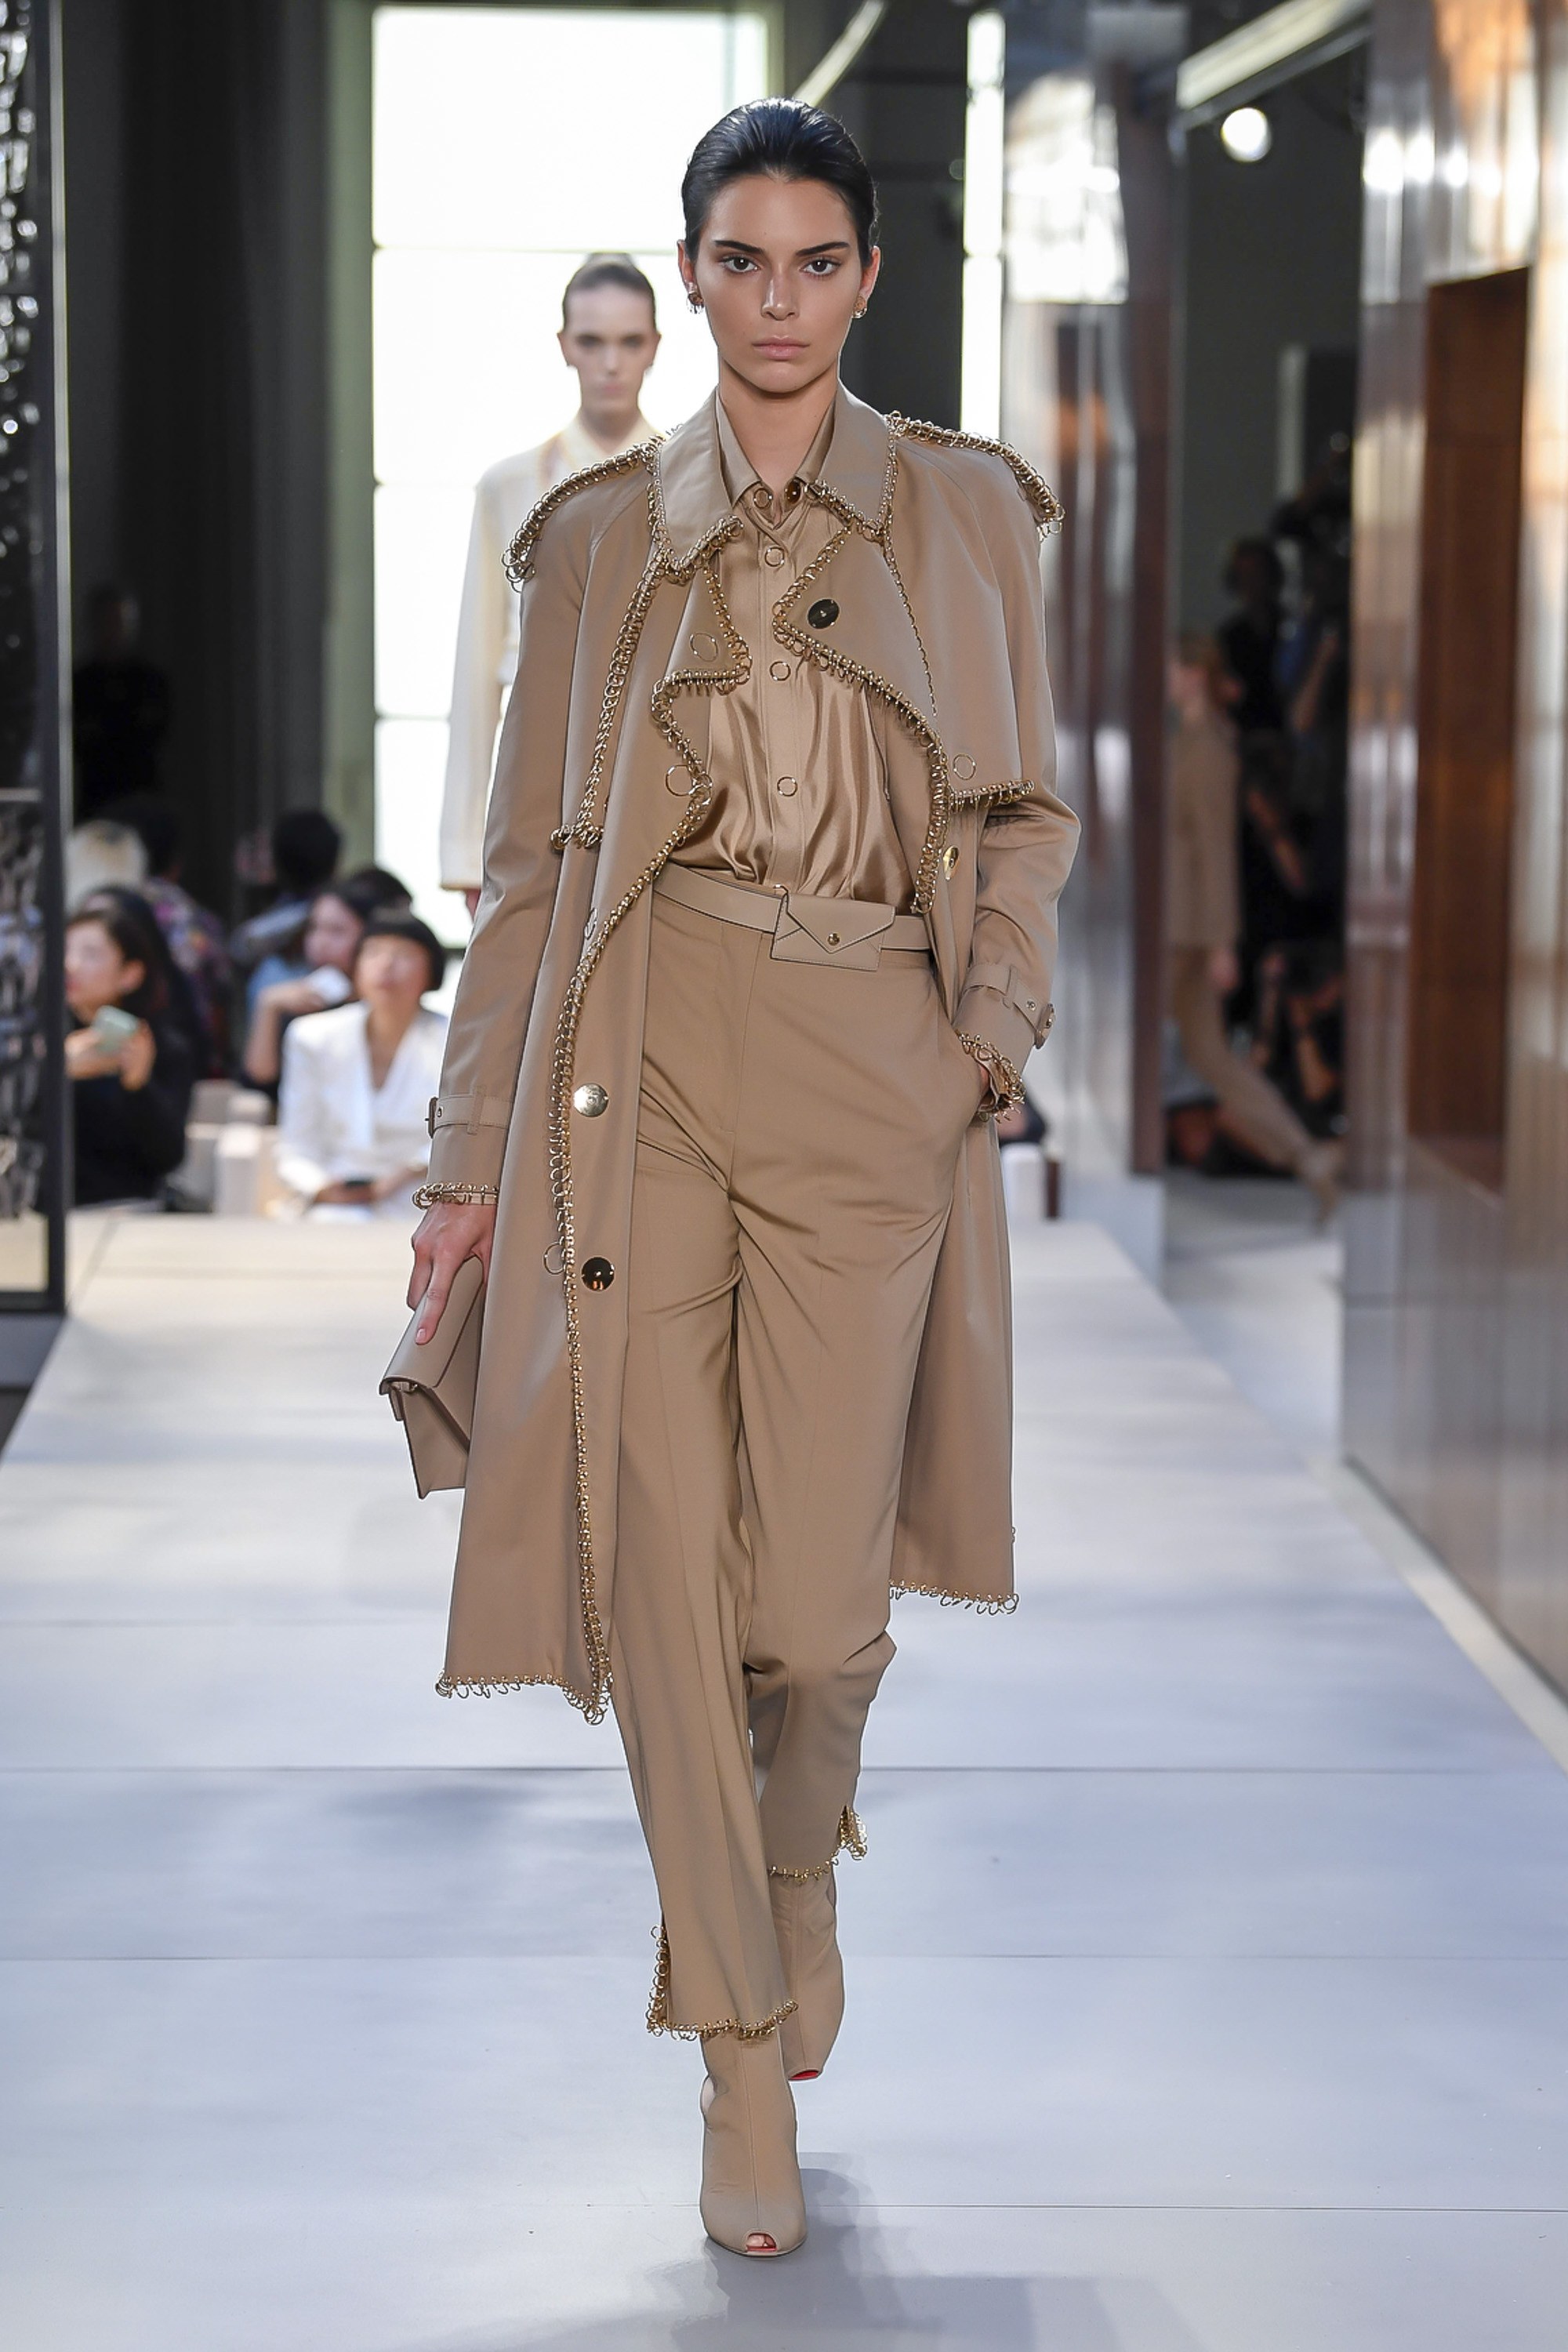 Best of Beige: The Summer Runway Looks That Prove the Neutral Shade Is Far  from Boring - A&E Magazine